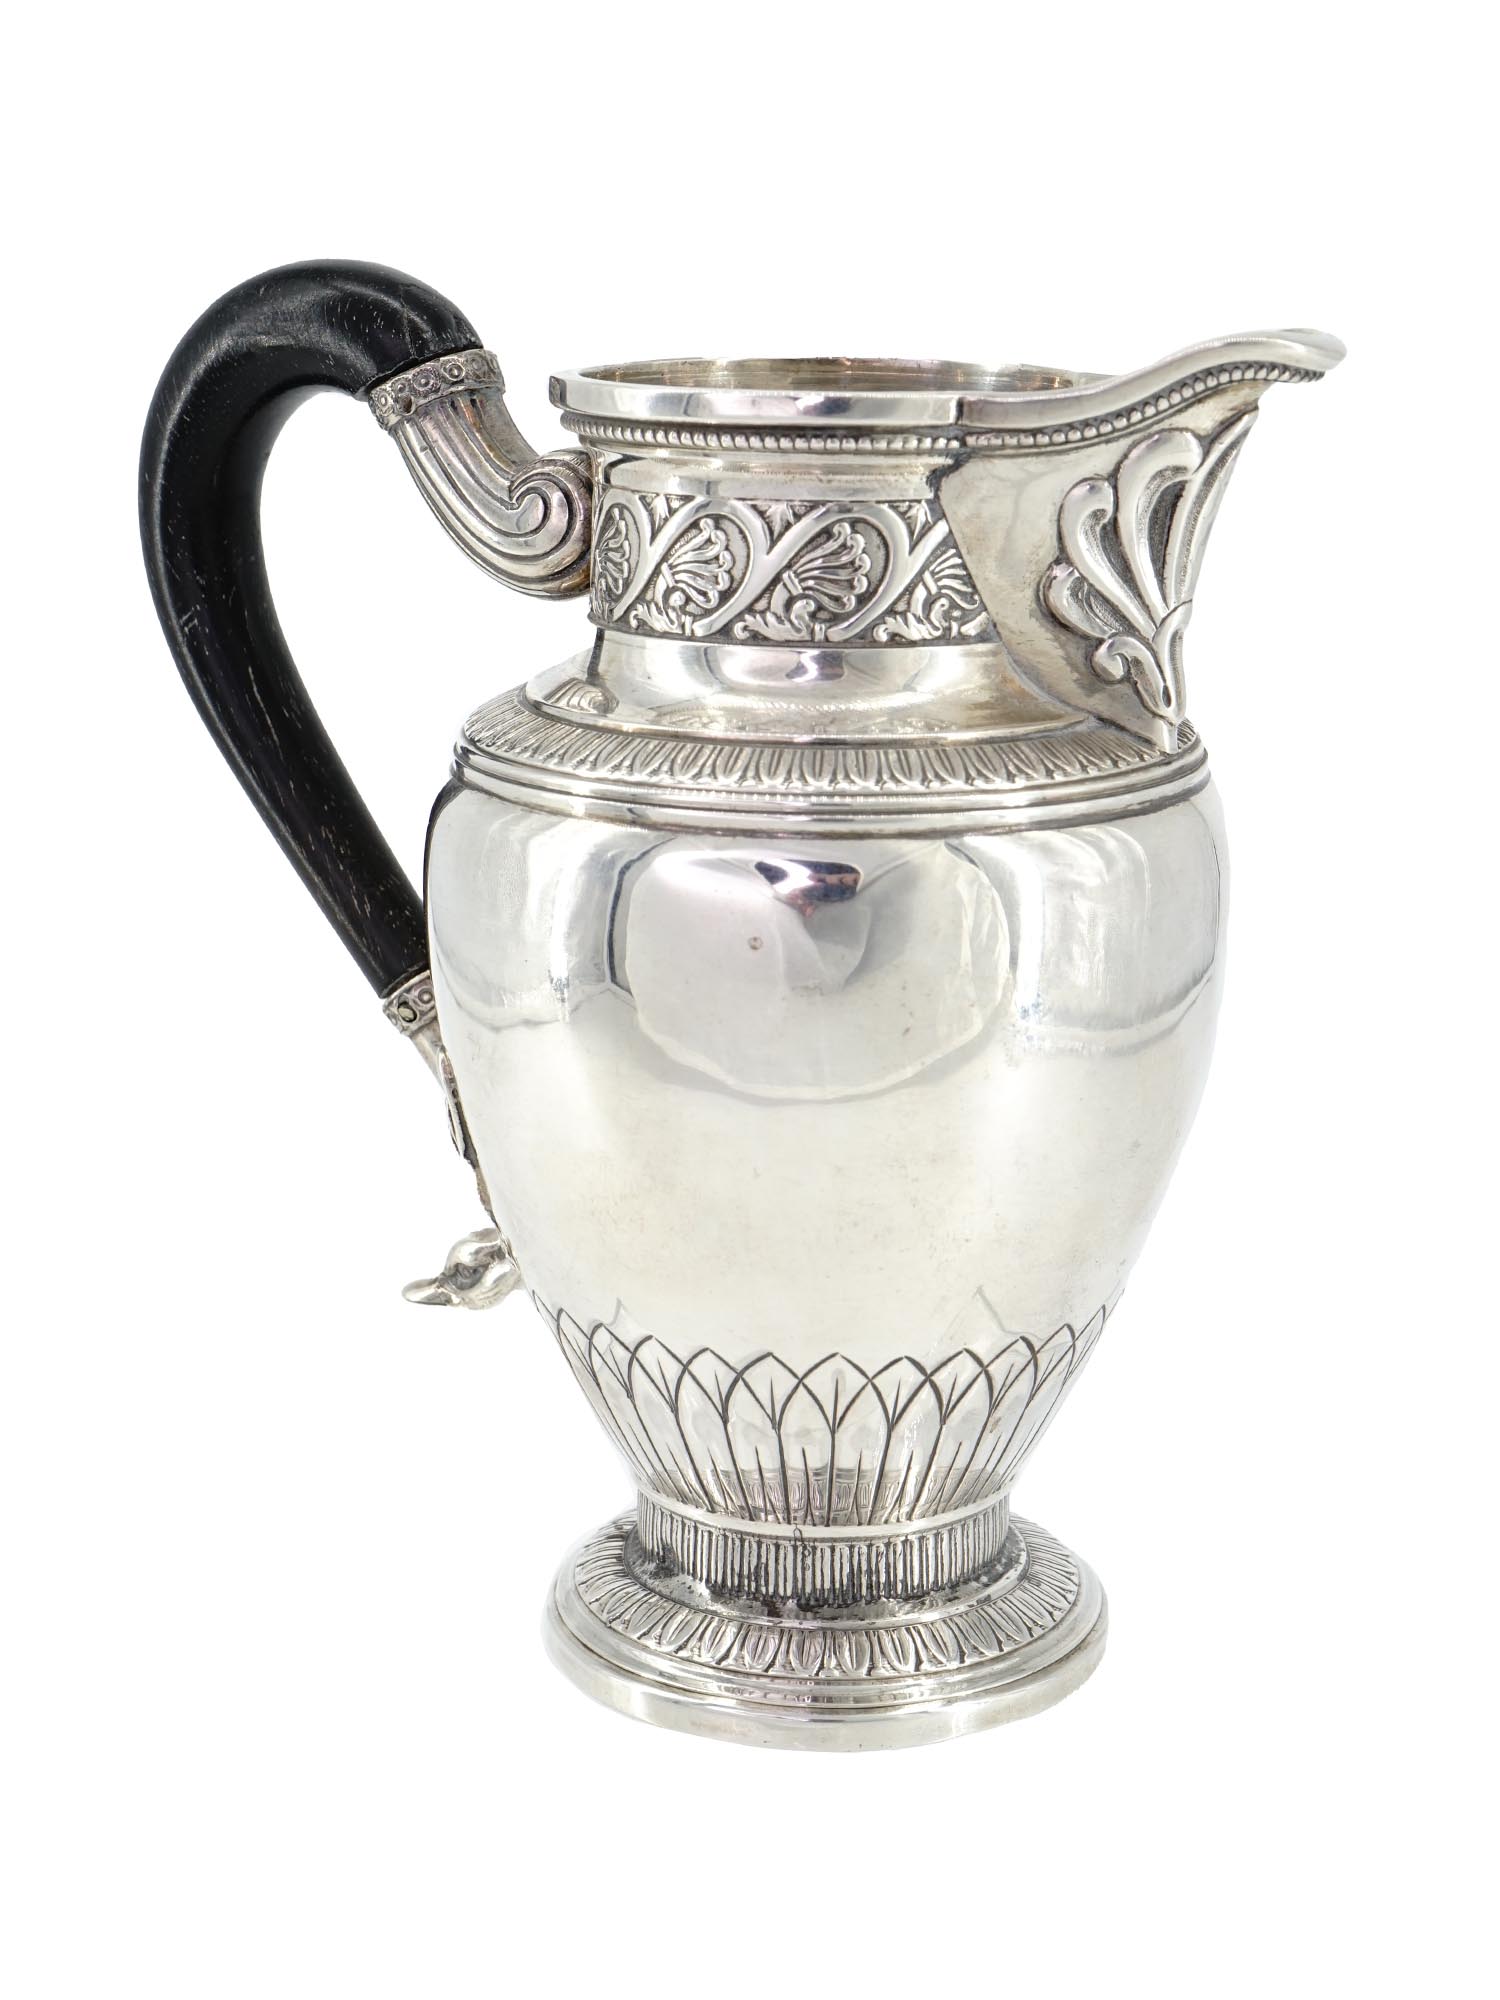 ANTIQUE FRENCH SILVER PITCHER WITH EBONY HANDLE PIC-0